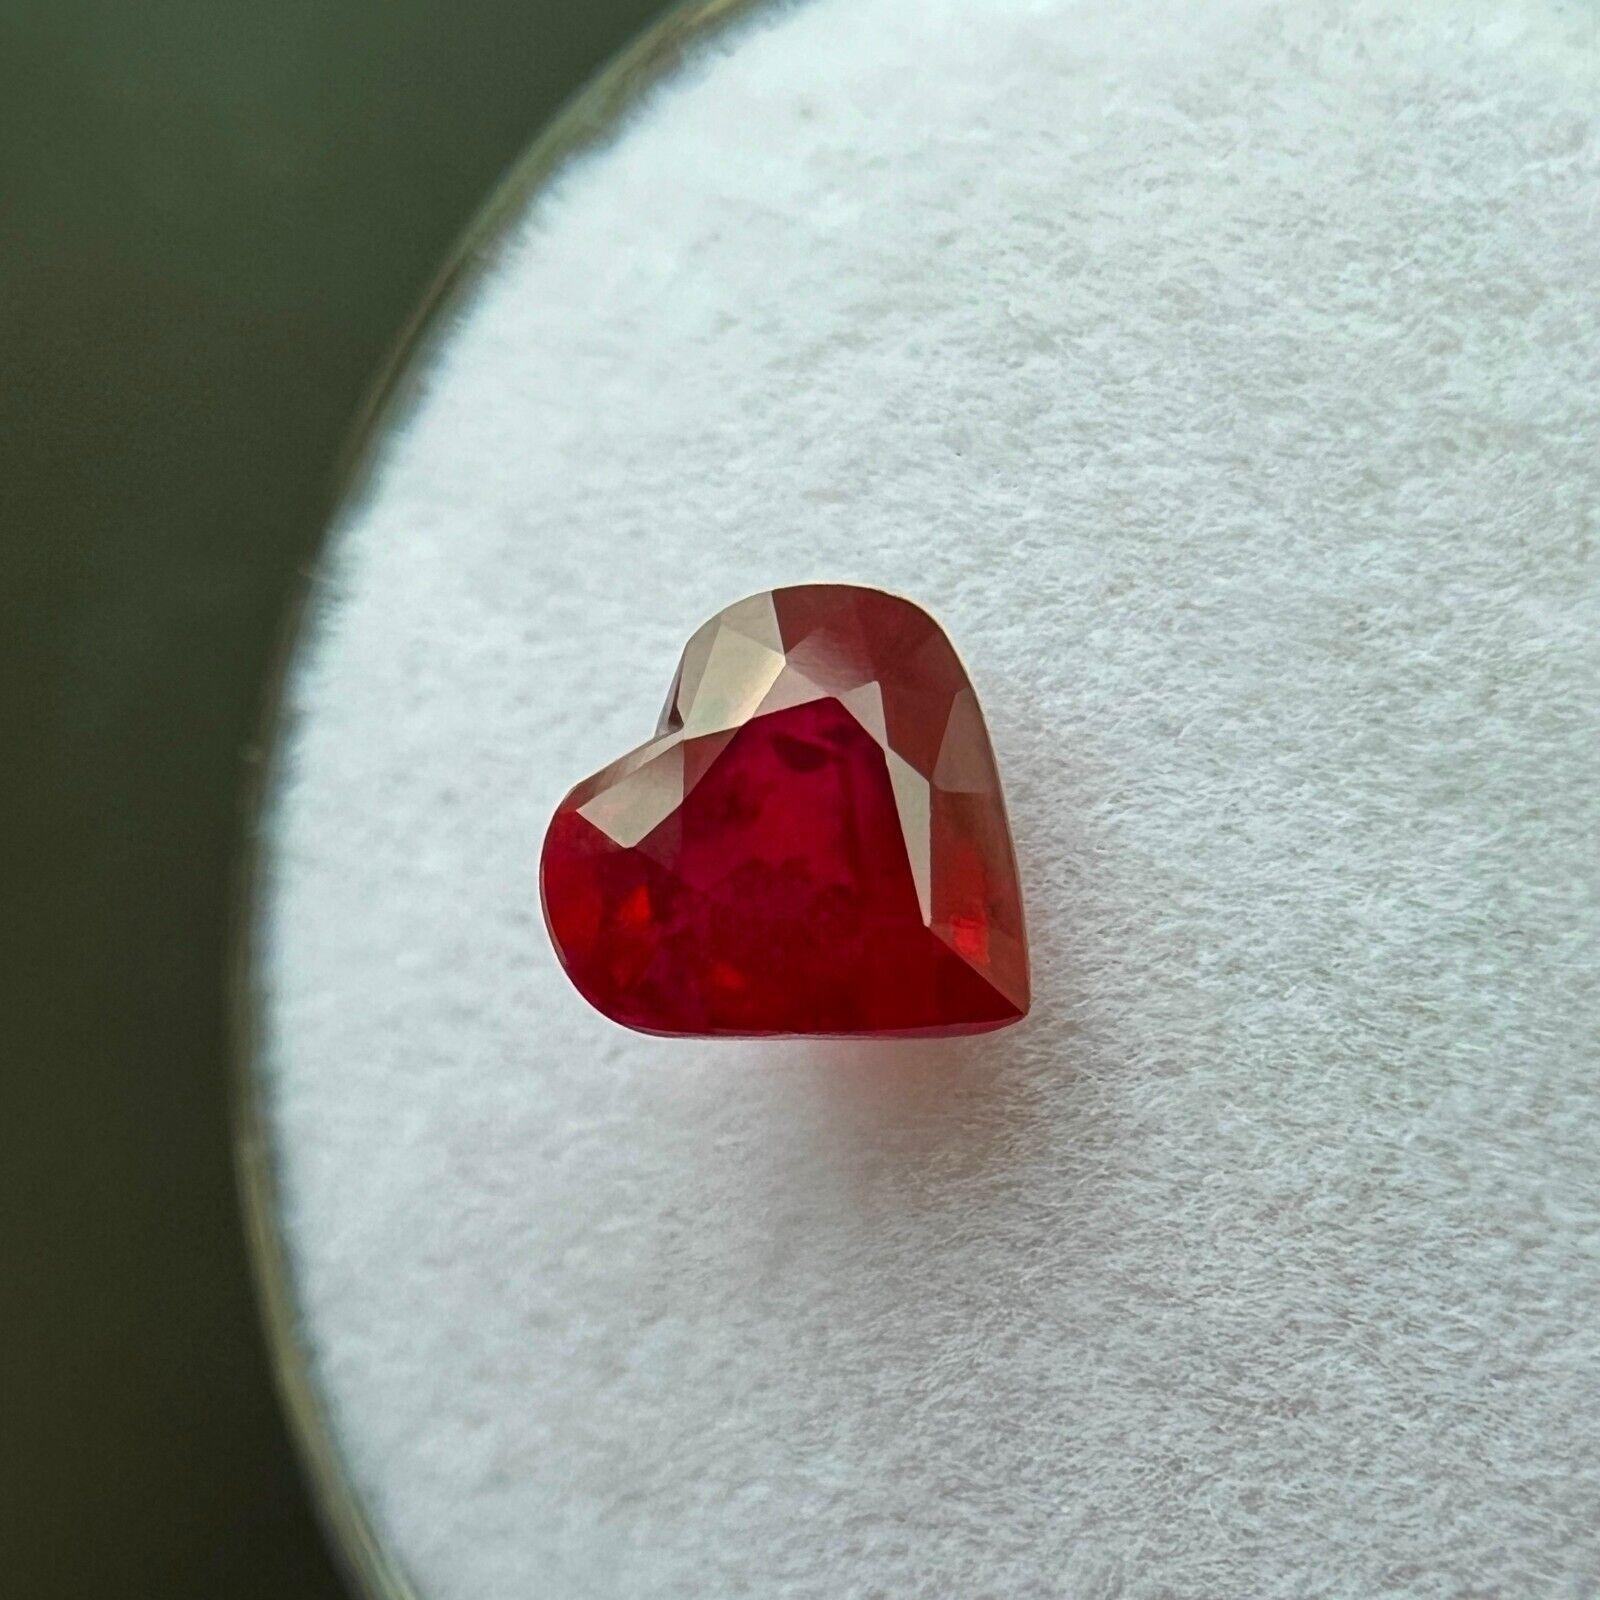 Women's or Men's Natural 1.16Ct Deep Red Ruby Heart Cut Loose Rare Gemstone 6.5x6mm For Sale